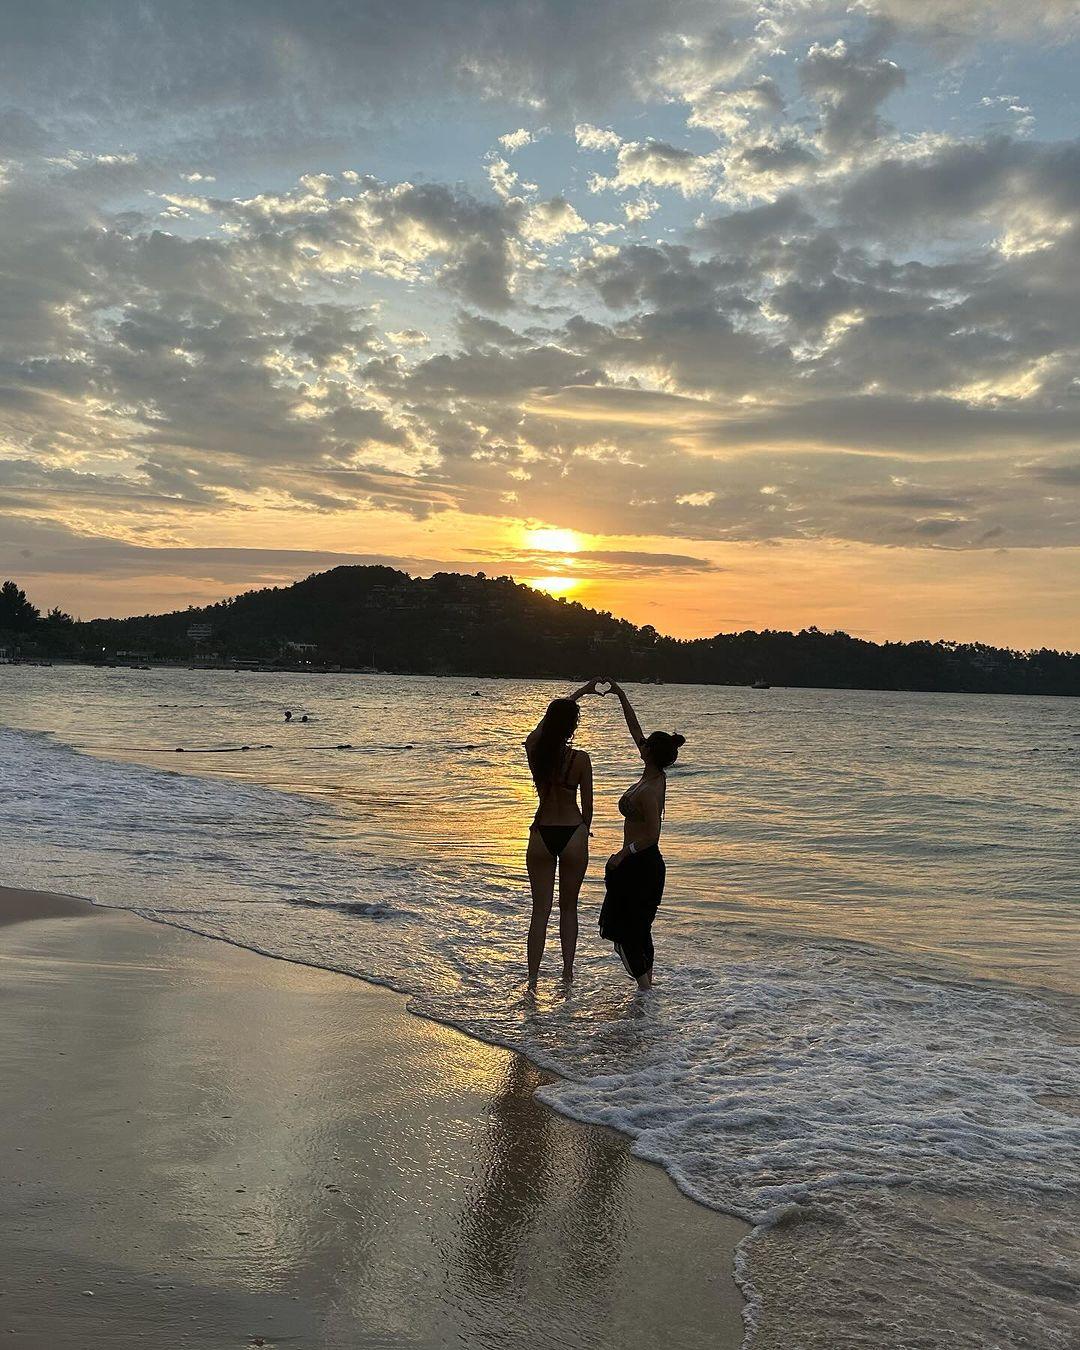 This one is a beautiful photo of Mouni and Disha by the beach during sunset, making a heart with their hands